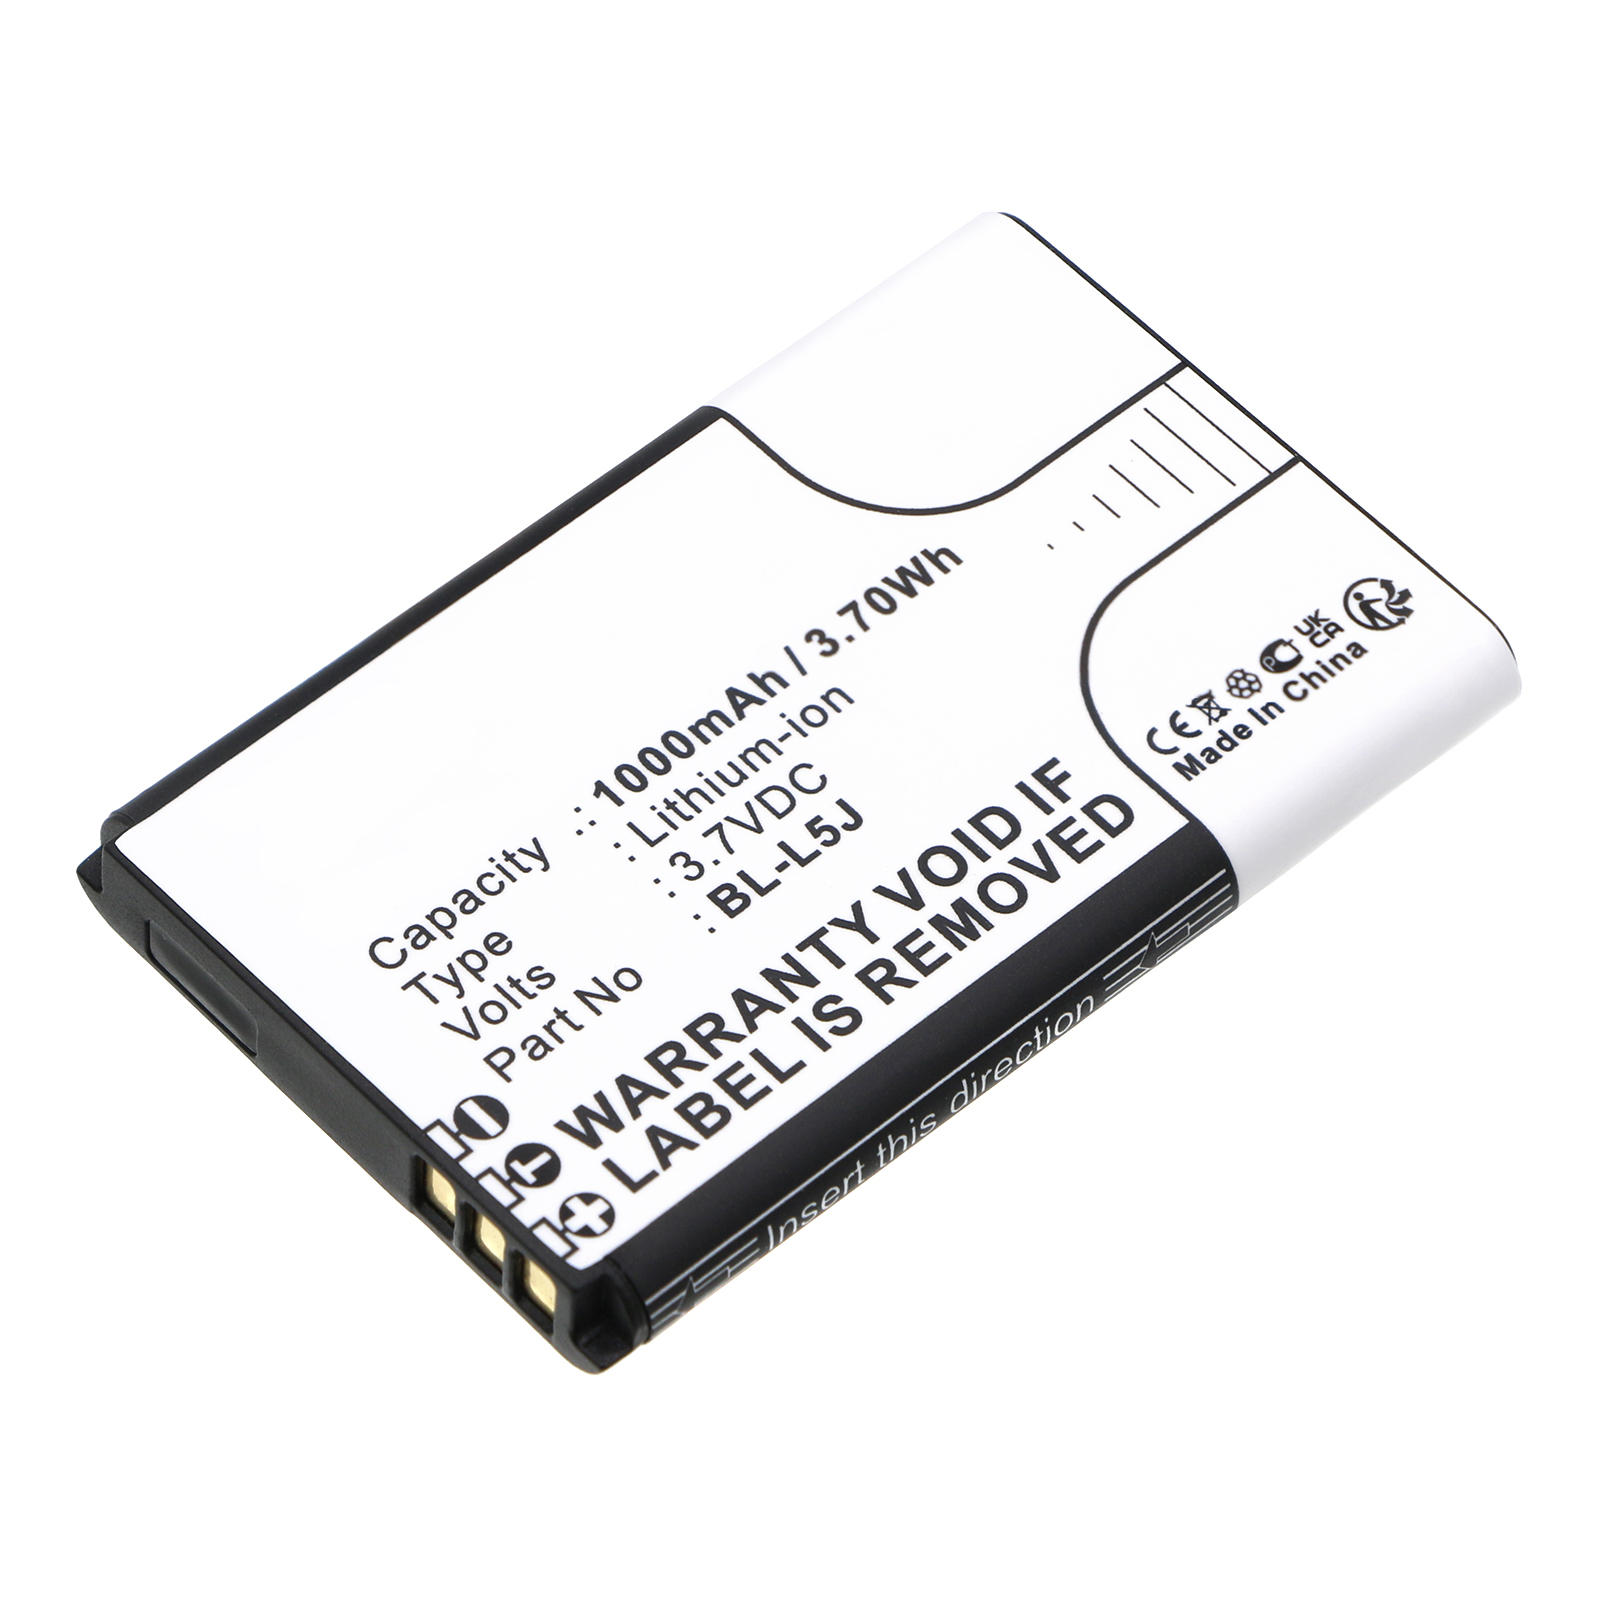 Synergy Digital Cell Phone Battery, Compatible with Nokia BL-L5J Cell Phone Battery (Li-ion, 3.7V, 1000mAh)